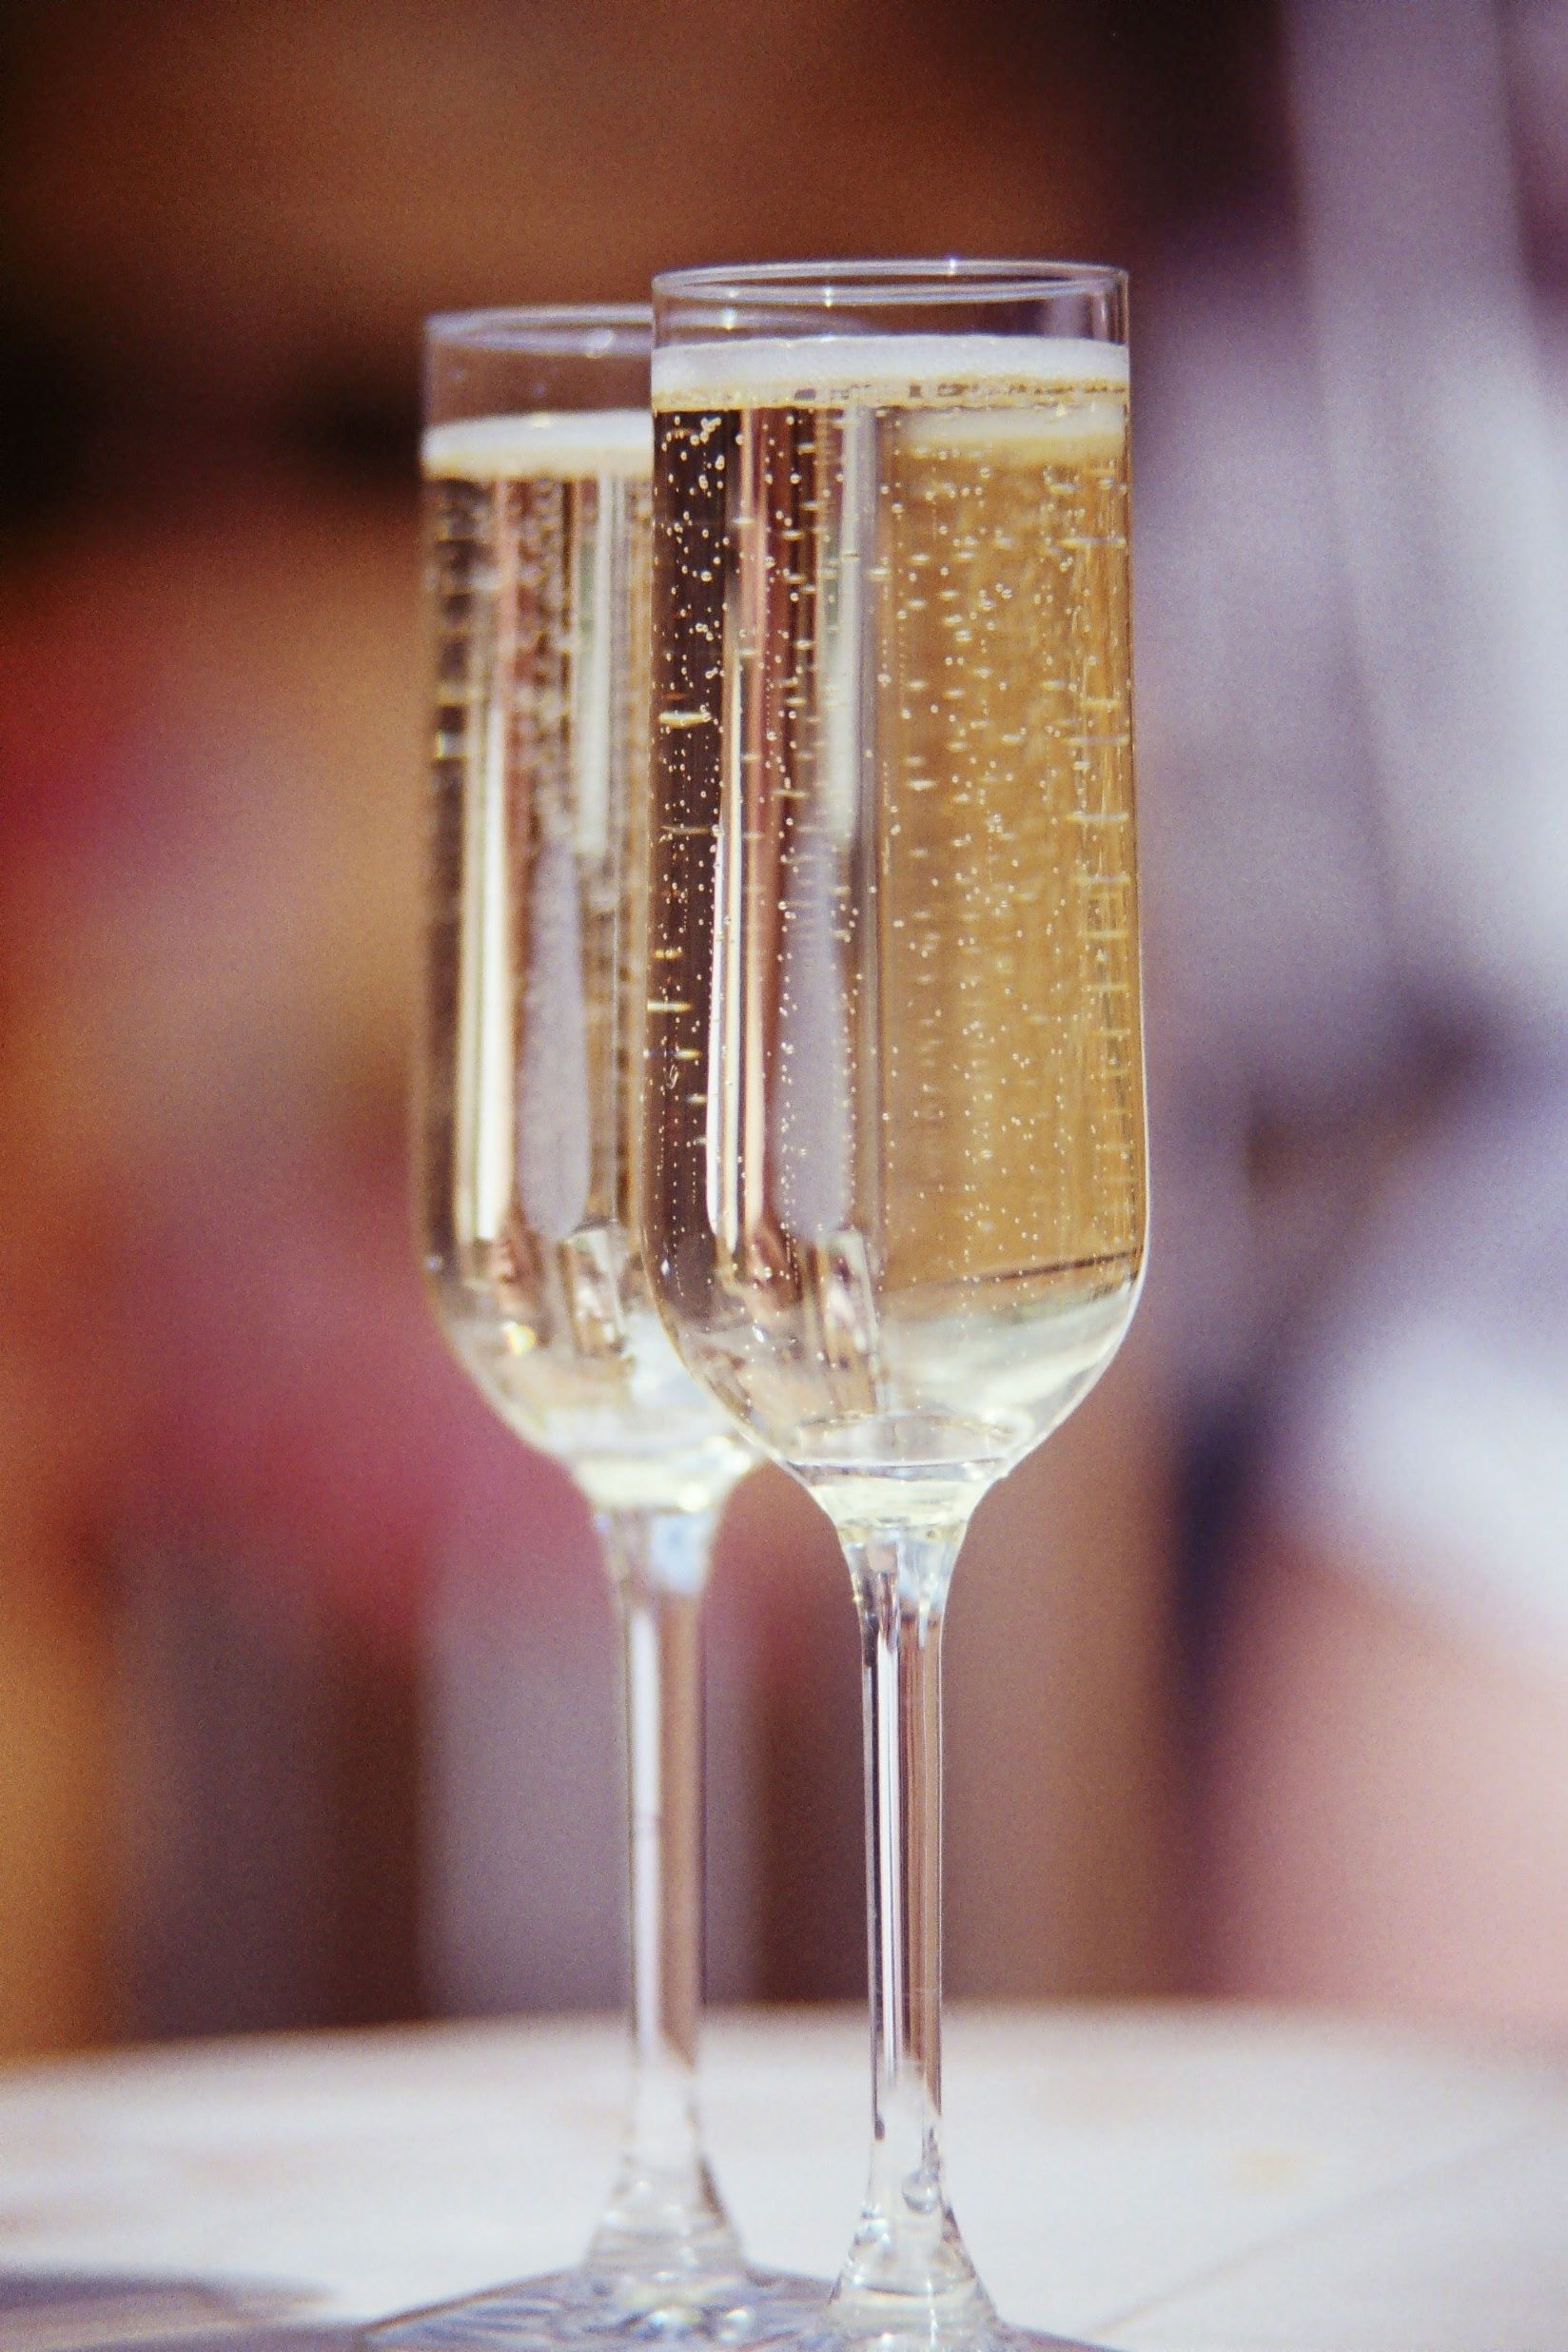 An image of 2 champagne flutes with champagne.